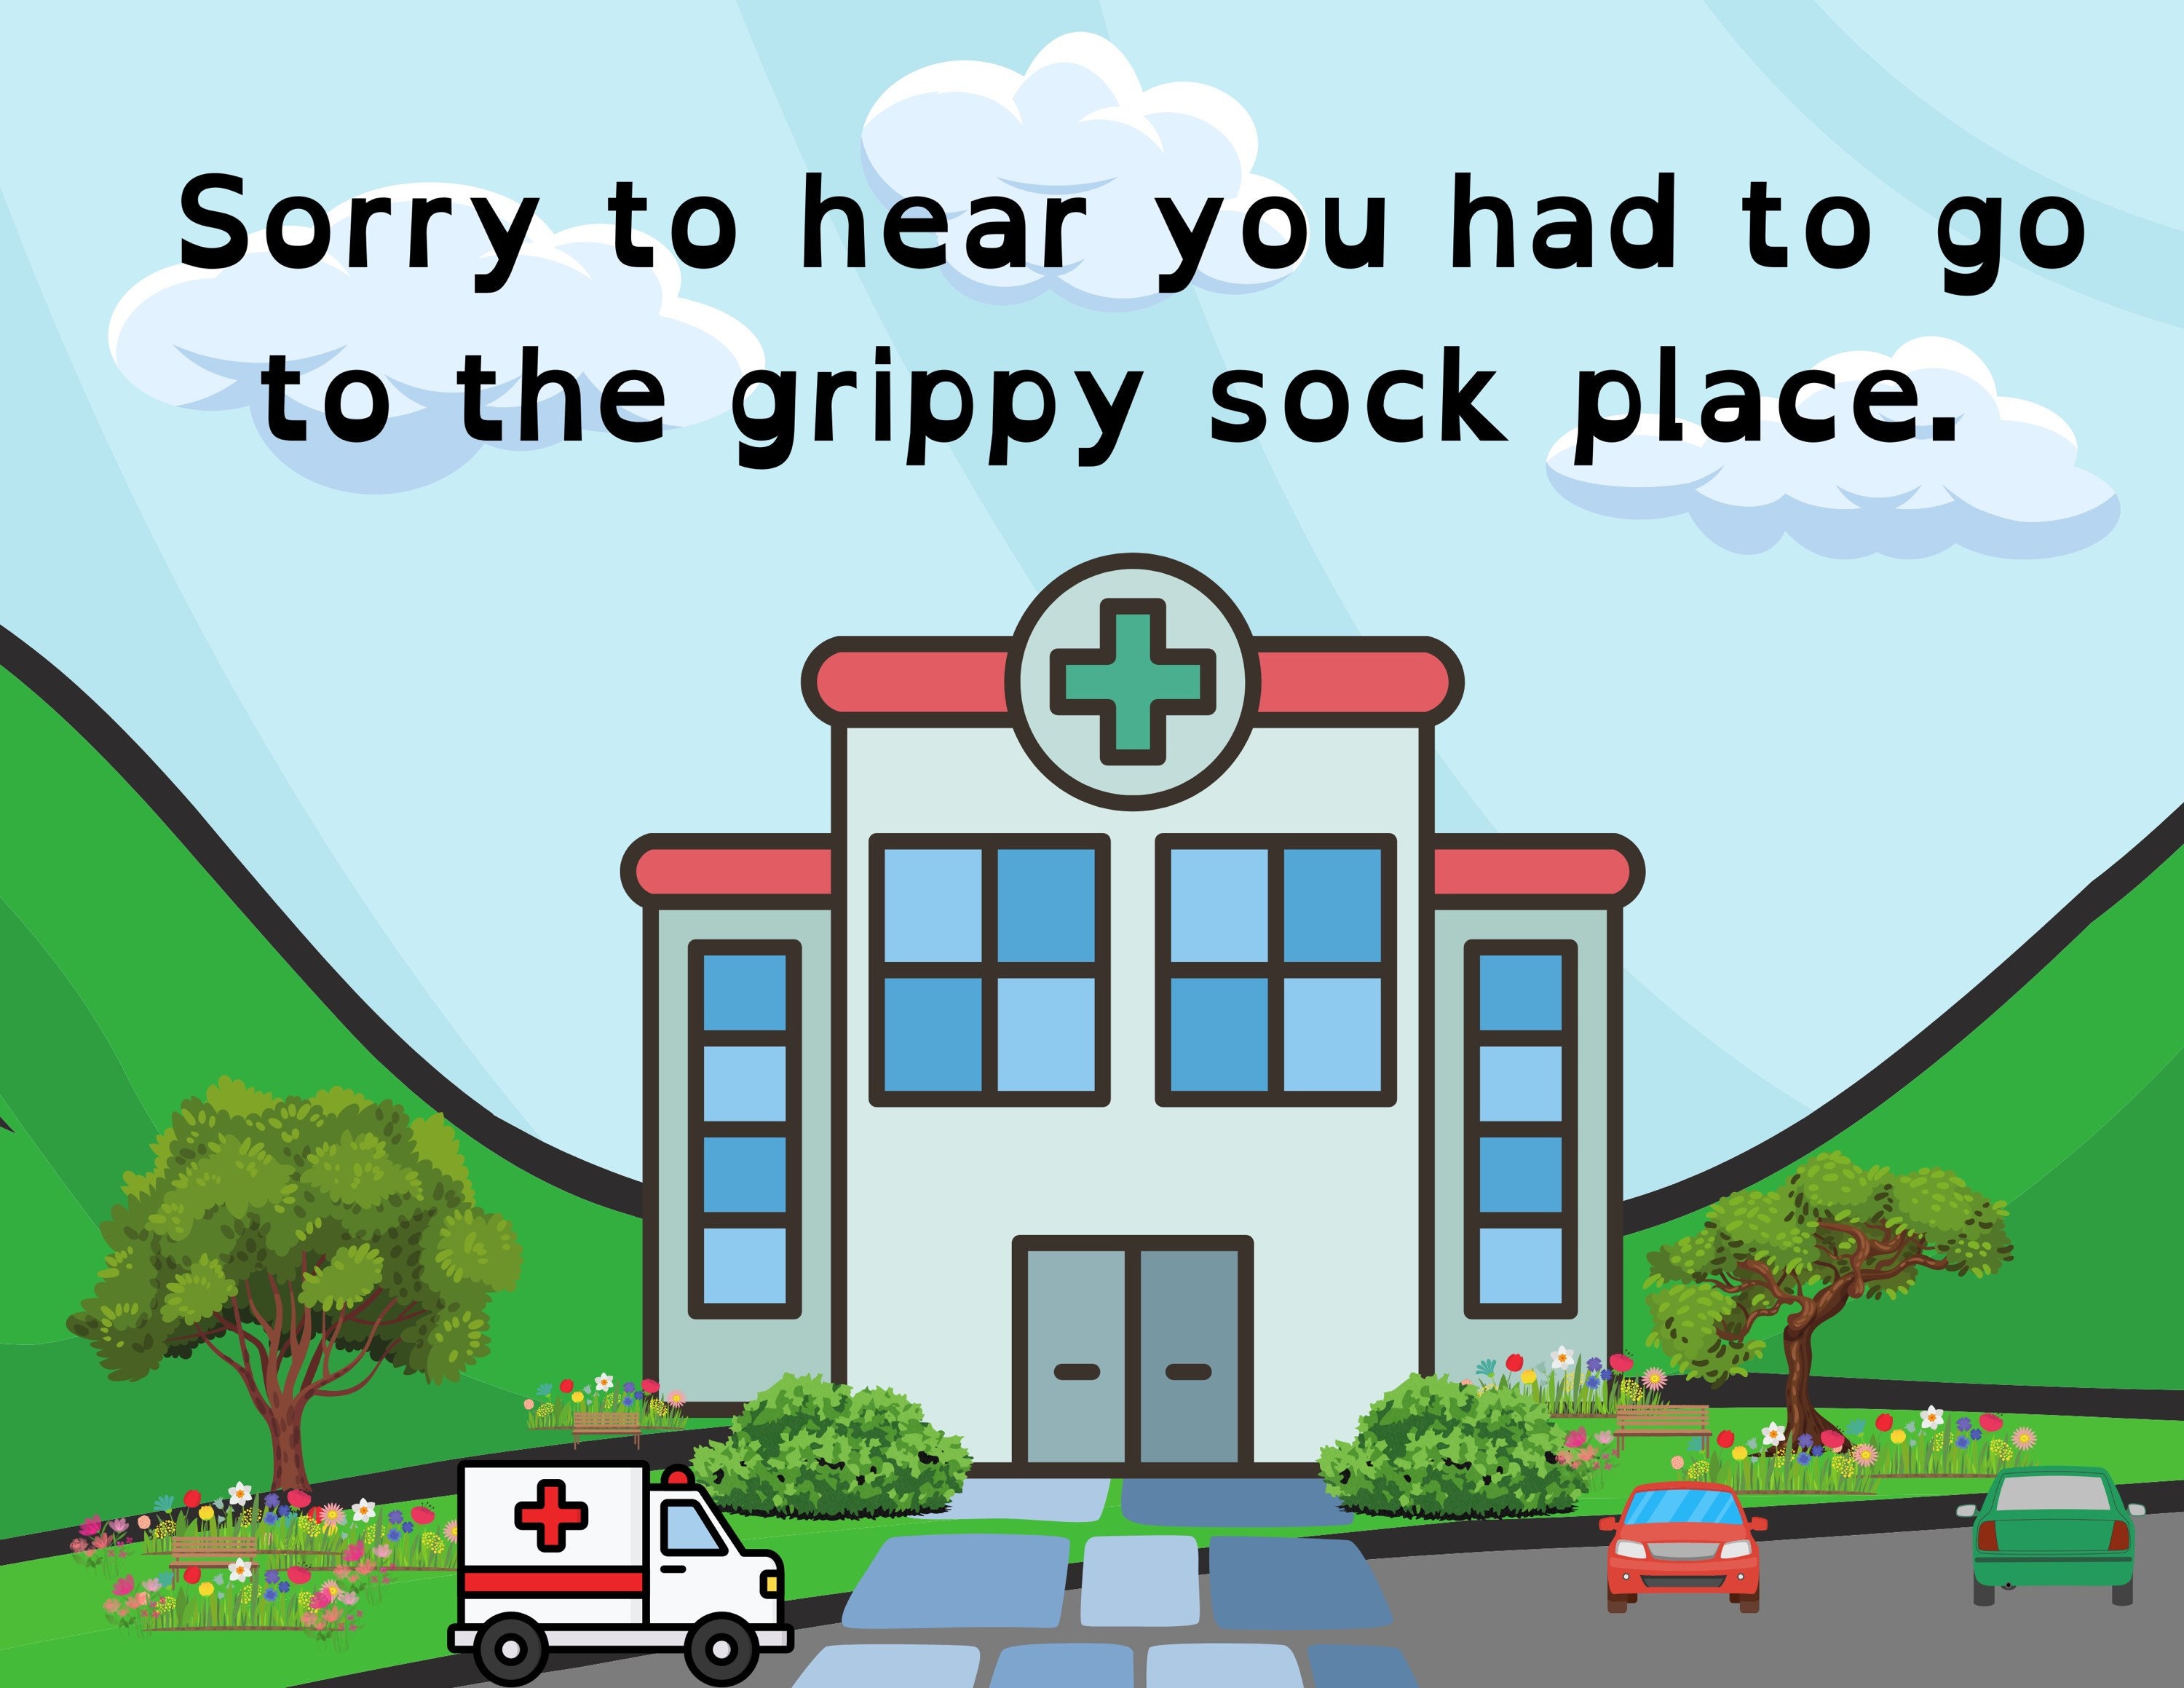 Get Well Soon Note Card - Grippy Sock Puppets Funny Card for a Sick Friend  at Hospital